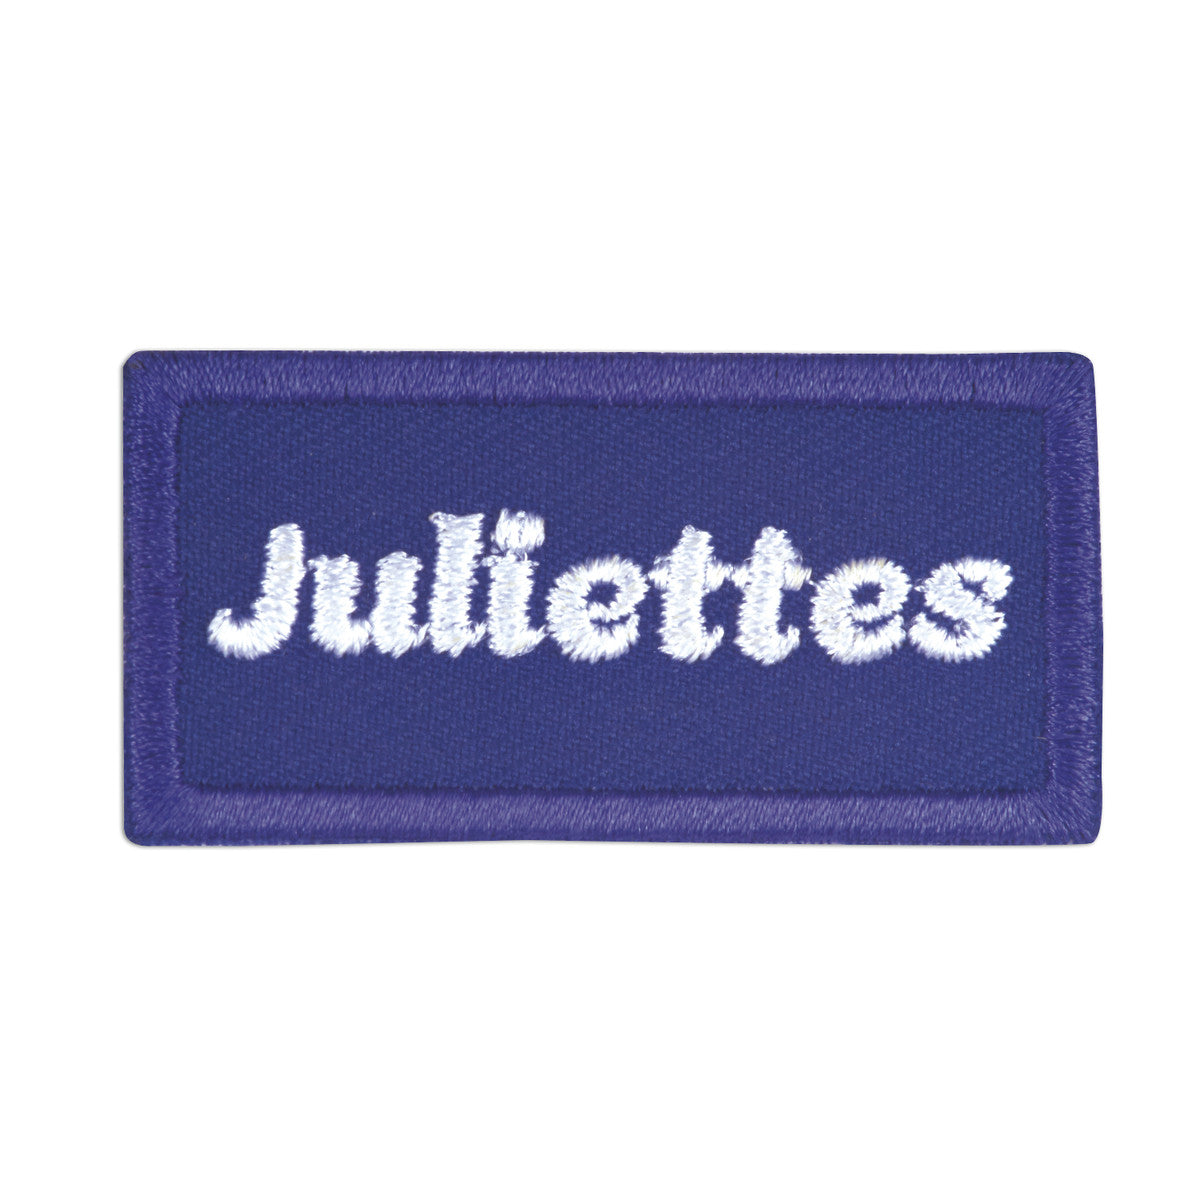 Girl Scouts Juliettes Iron-On Patch - Basics Clothing Store